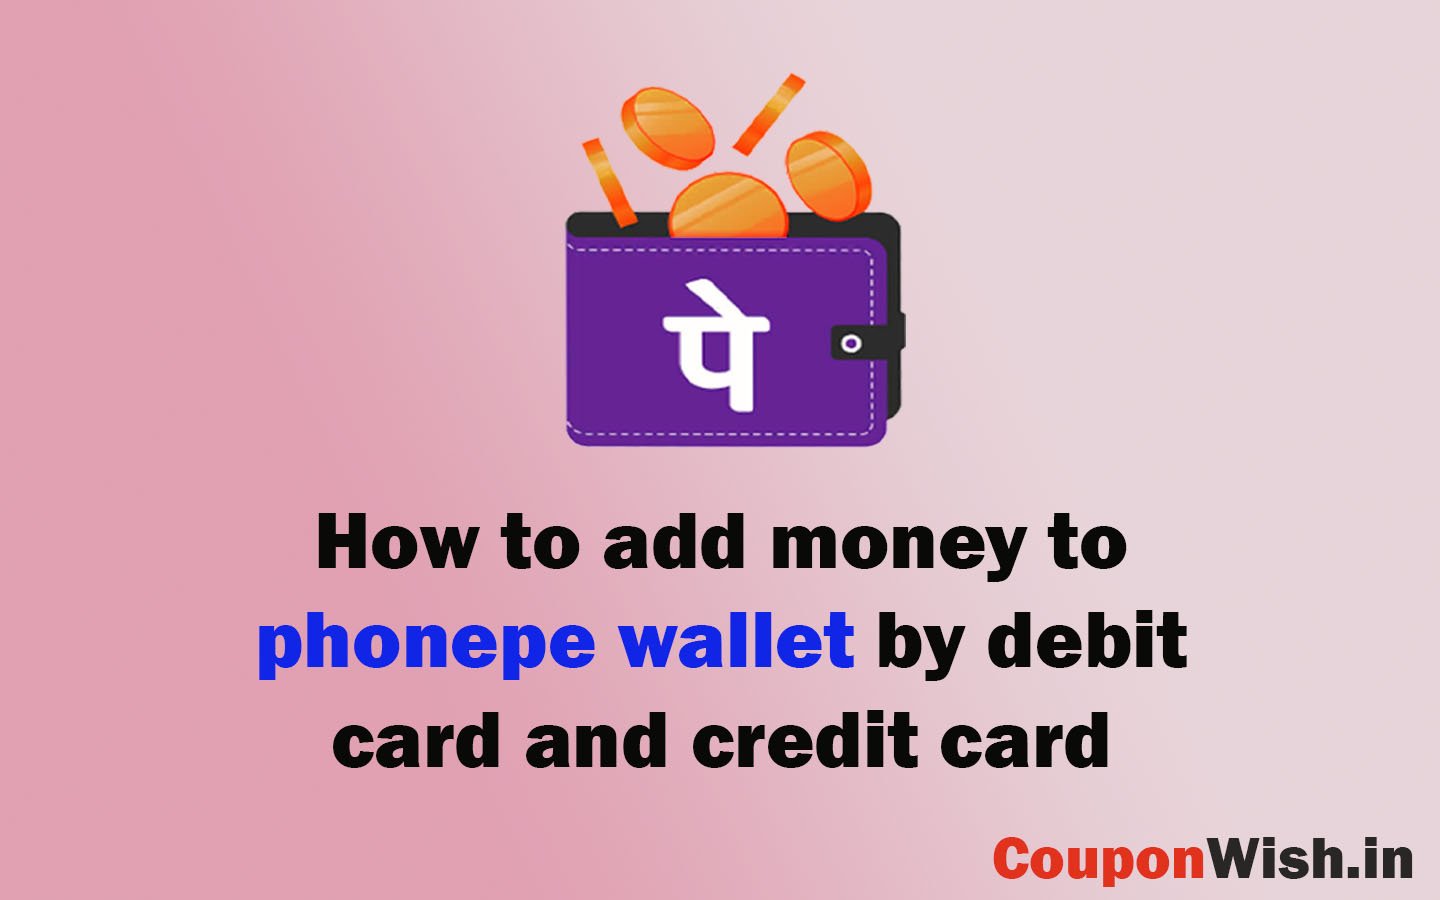 How to add money to phonepe wallet